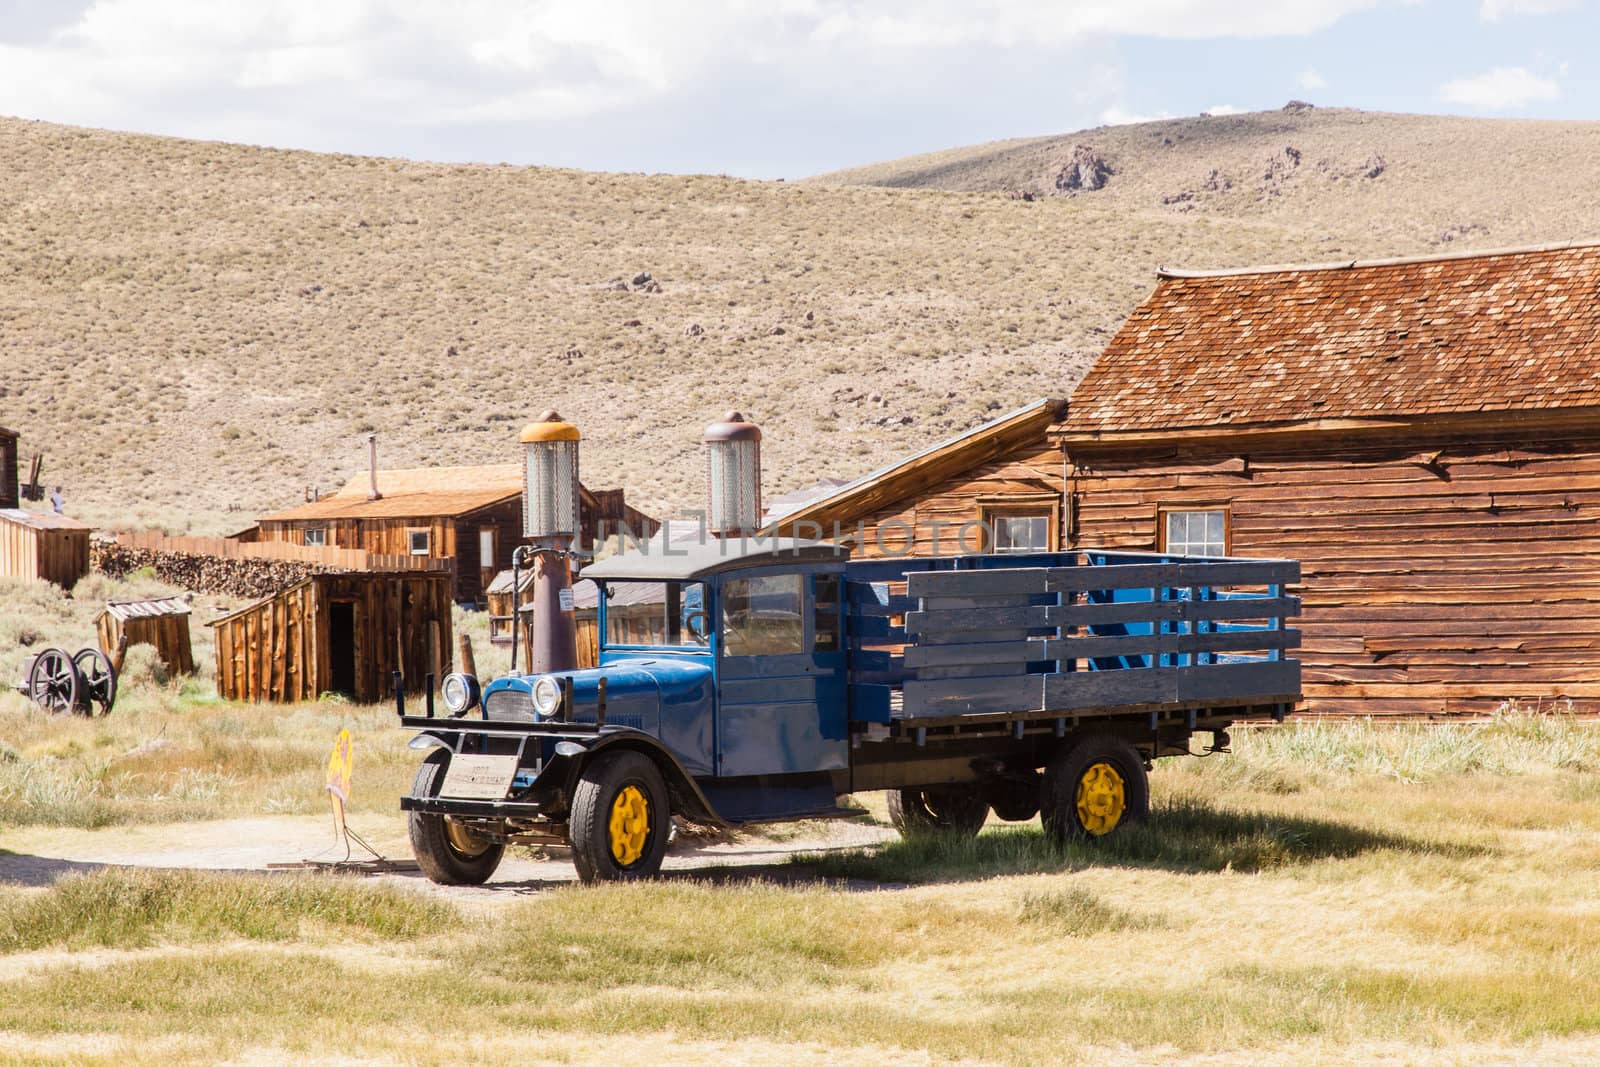 Bodie is a ghost town in the Bodie Hills east of the Sierra Nevada mountain range in Mono County, California, United States